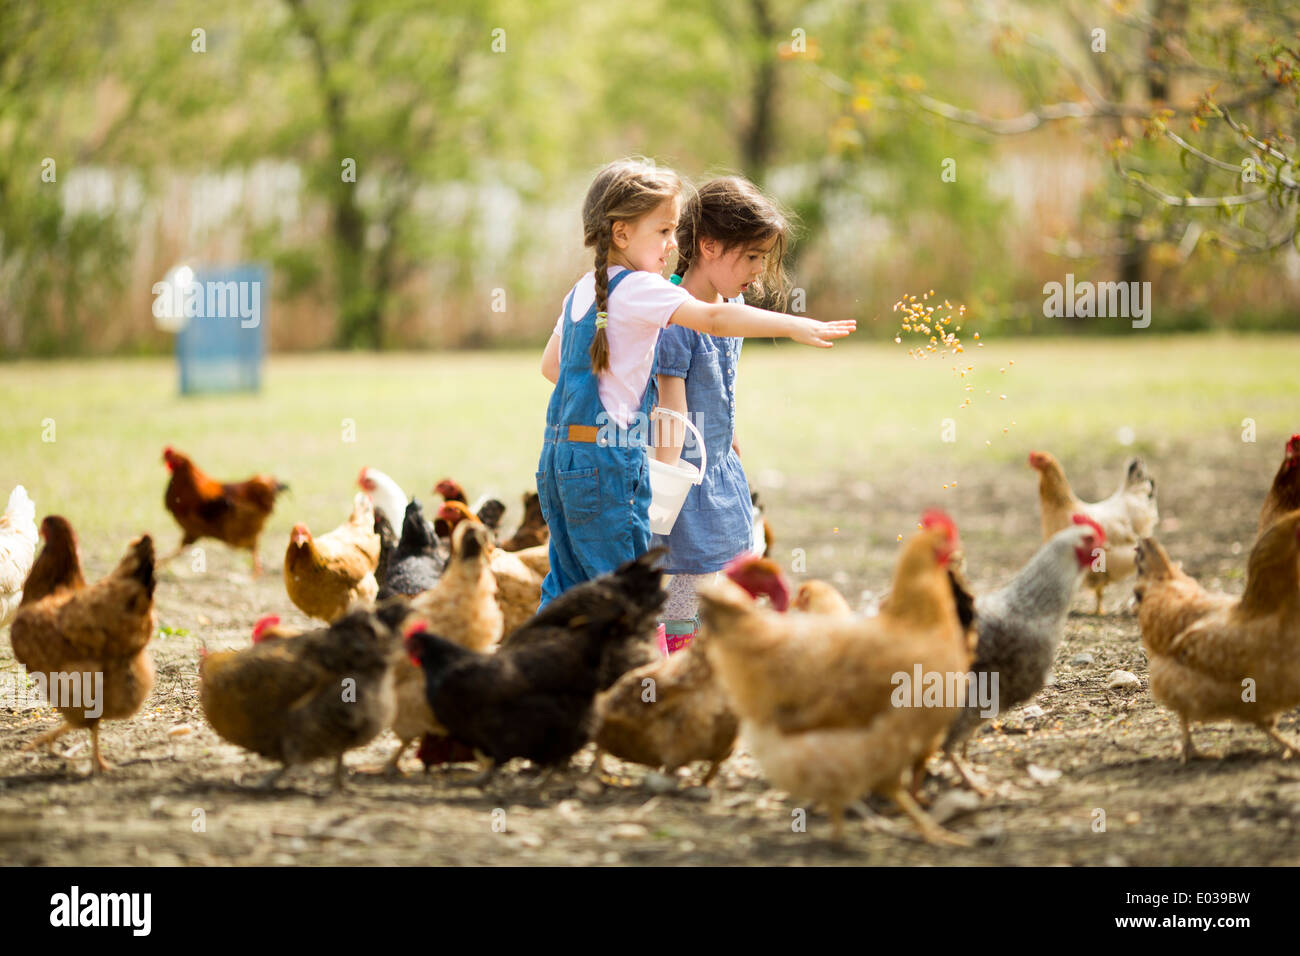 Two little girl feeding chickens Stock Photo